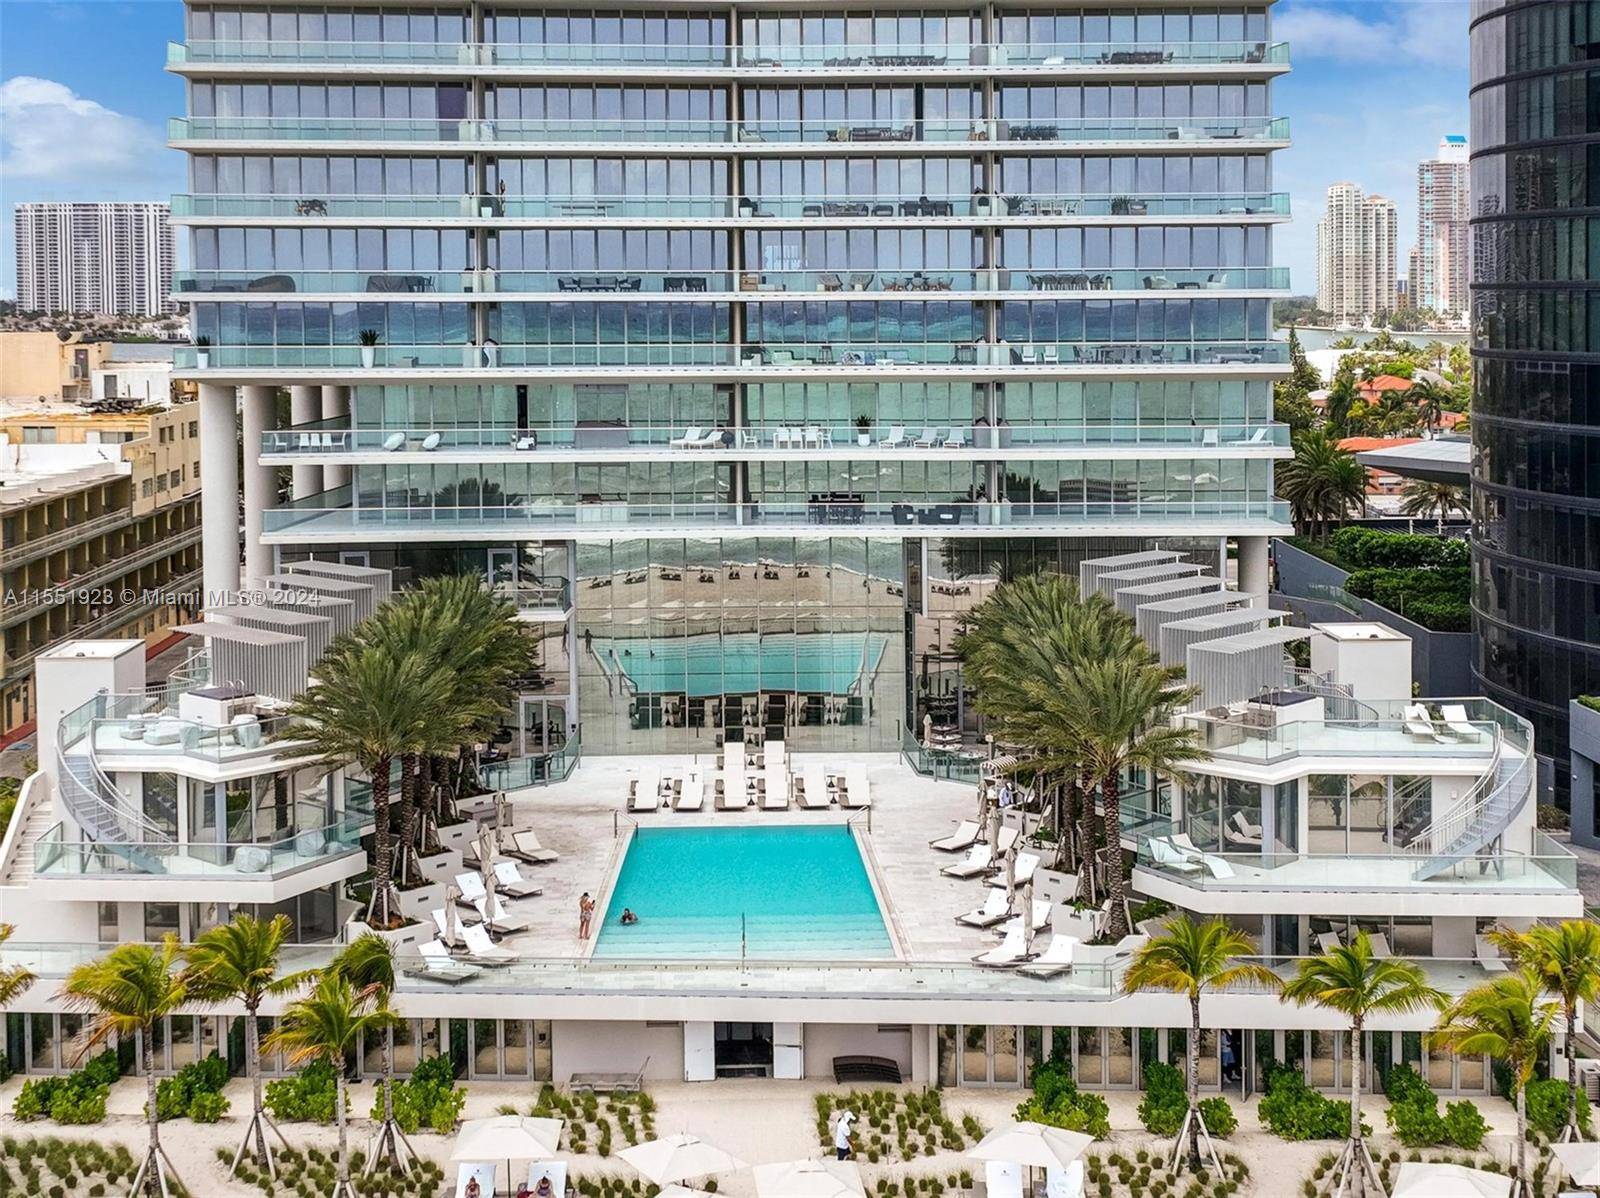 Welcome to Turnberry Ocean Club residences a 54 story premier luxury residential tower overlooking the sparkling waters of the Atlantic.